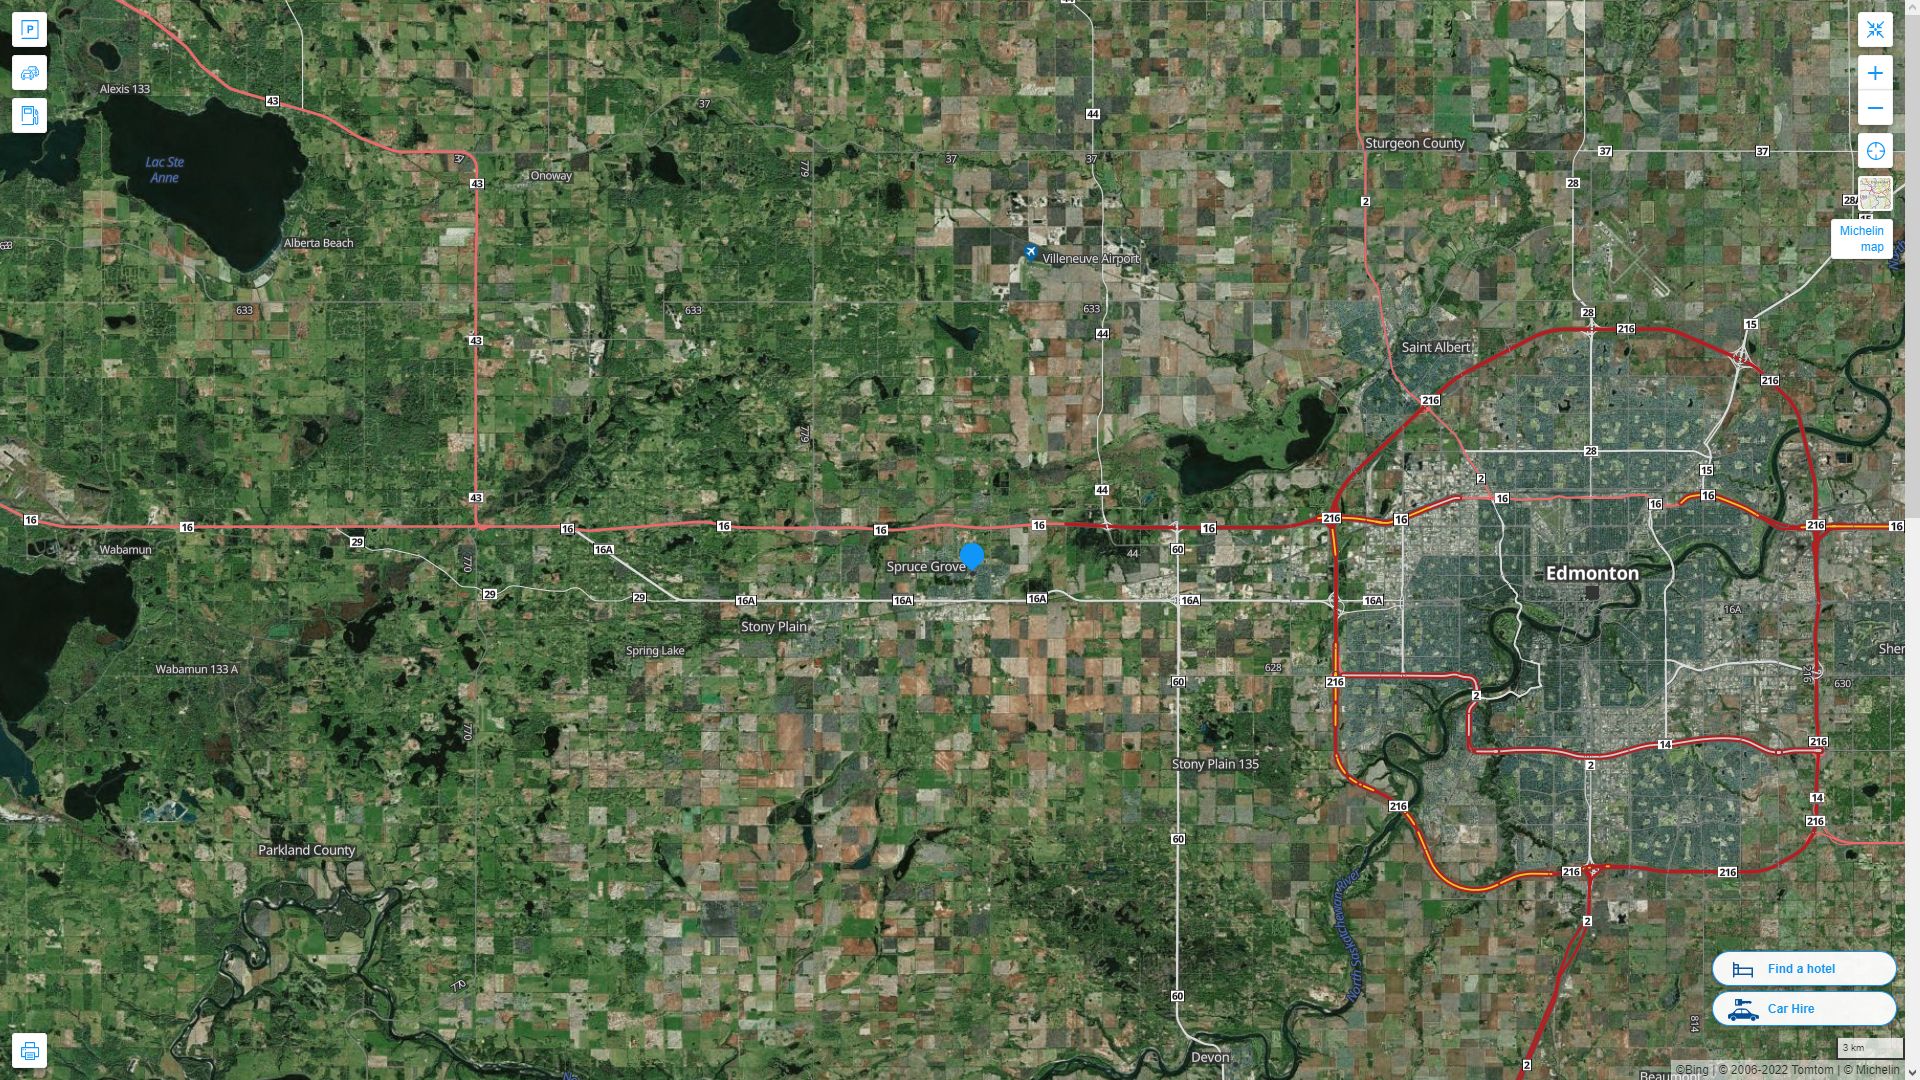 Spruce Grove Highway and Road Map with Satellite View